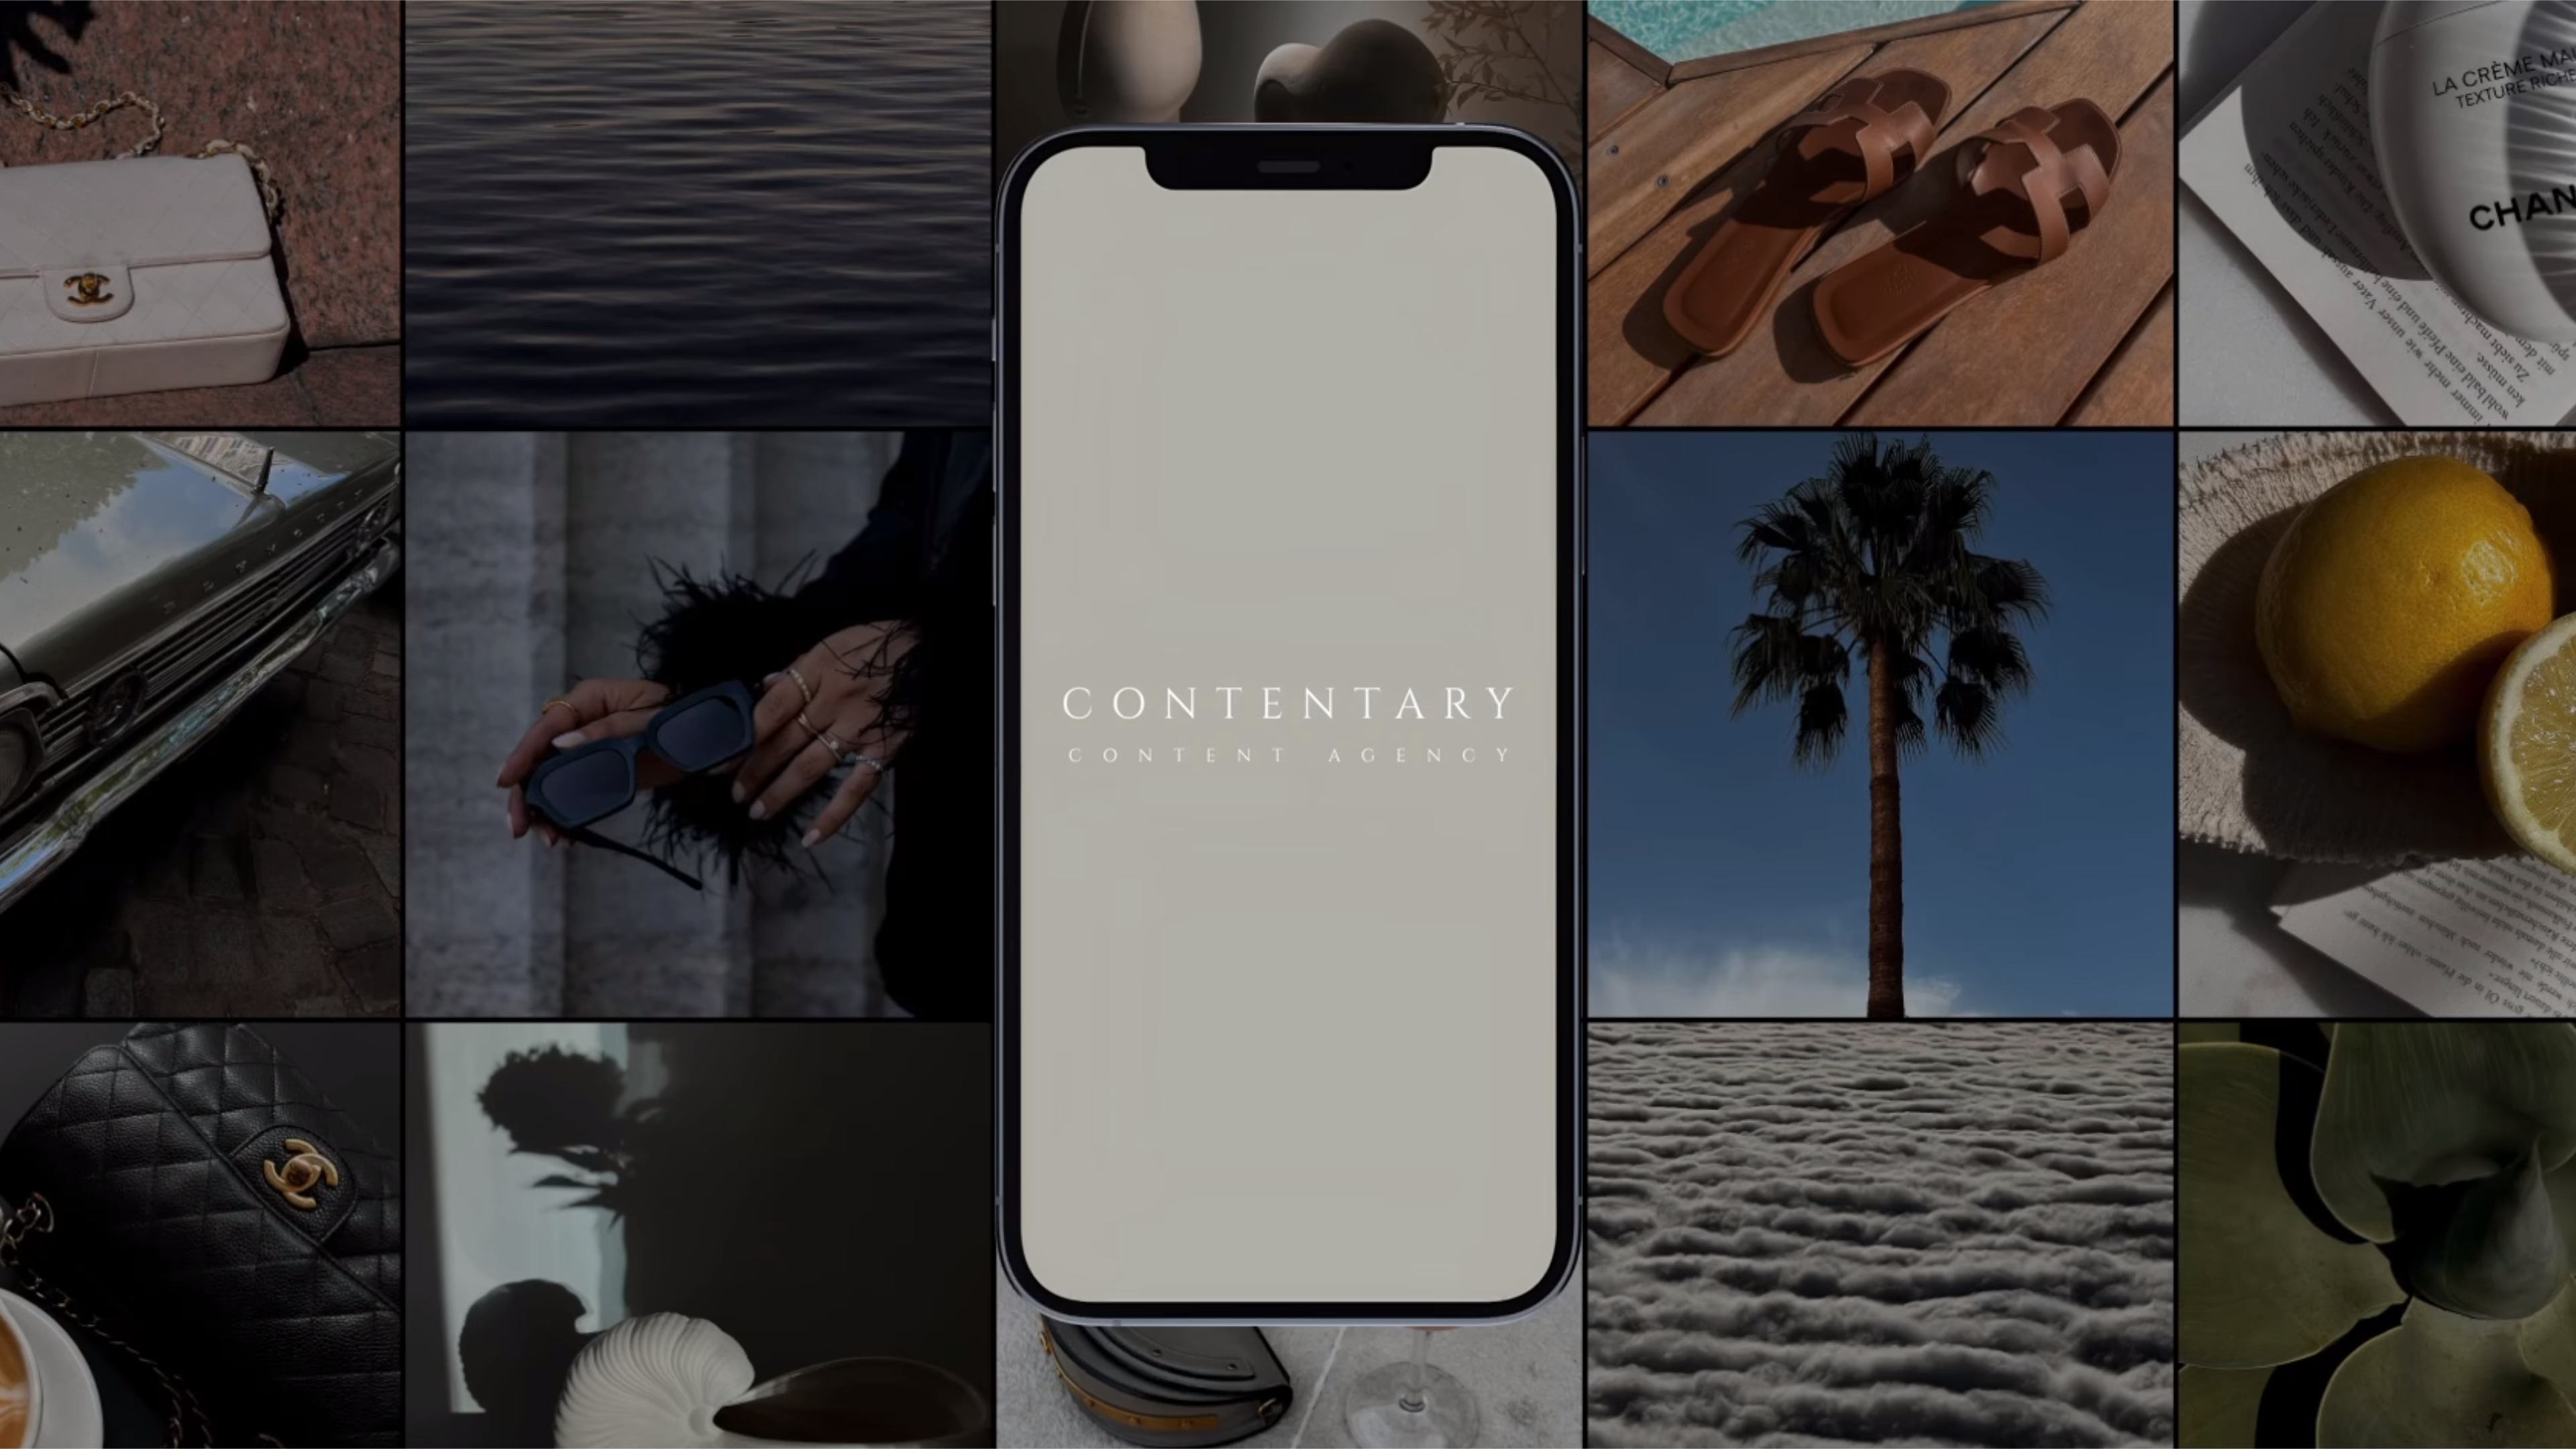 An iPhone displaying the Contentary logo with a vibrant mood board in the background